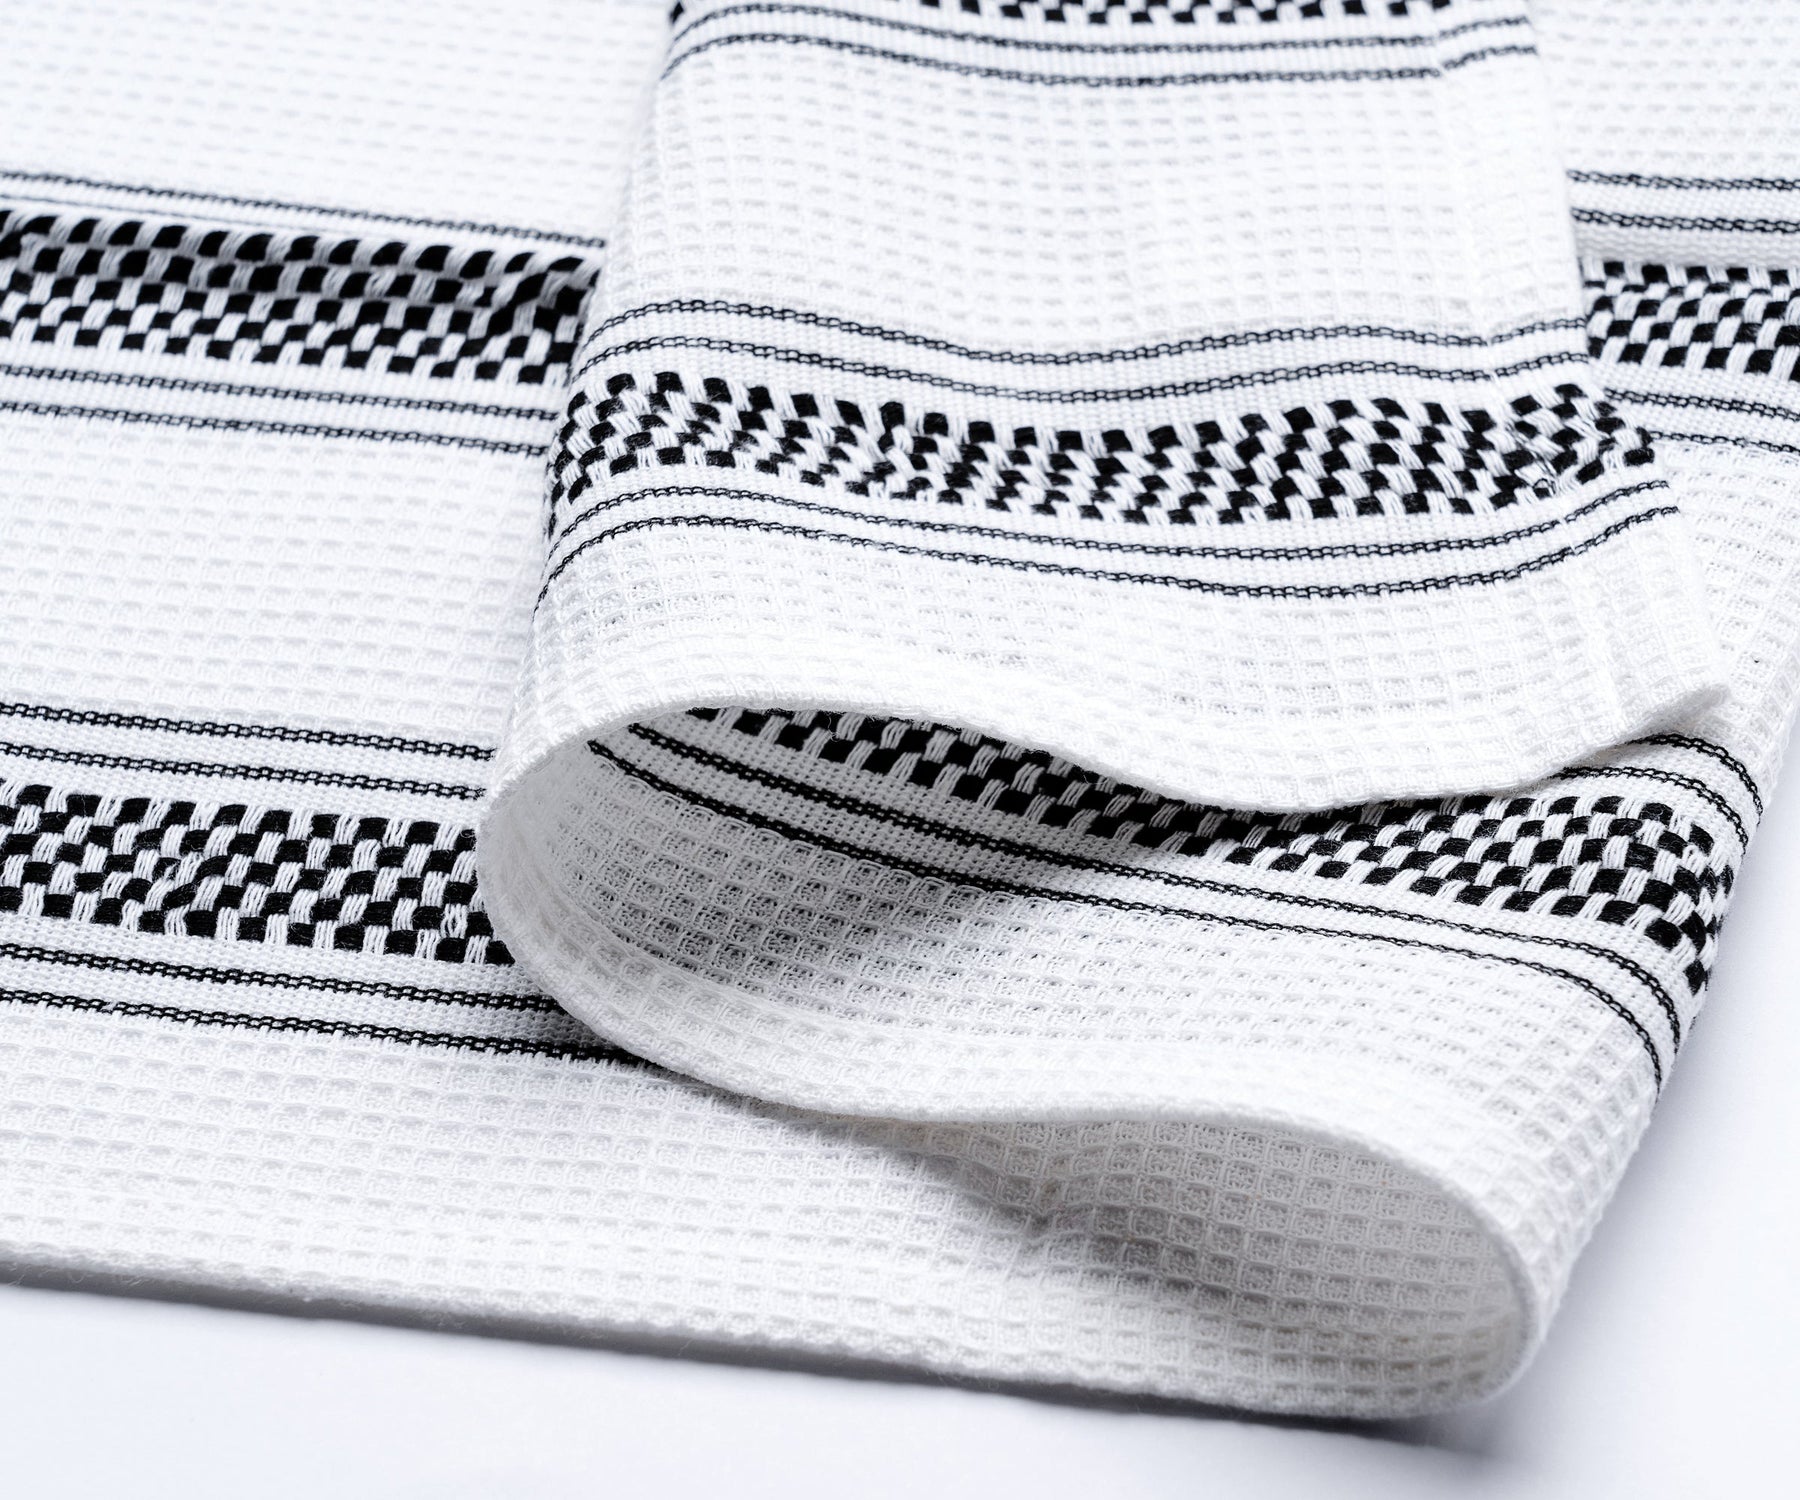 Close-up view of a black kitchen hand towel with white stripes